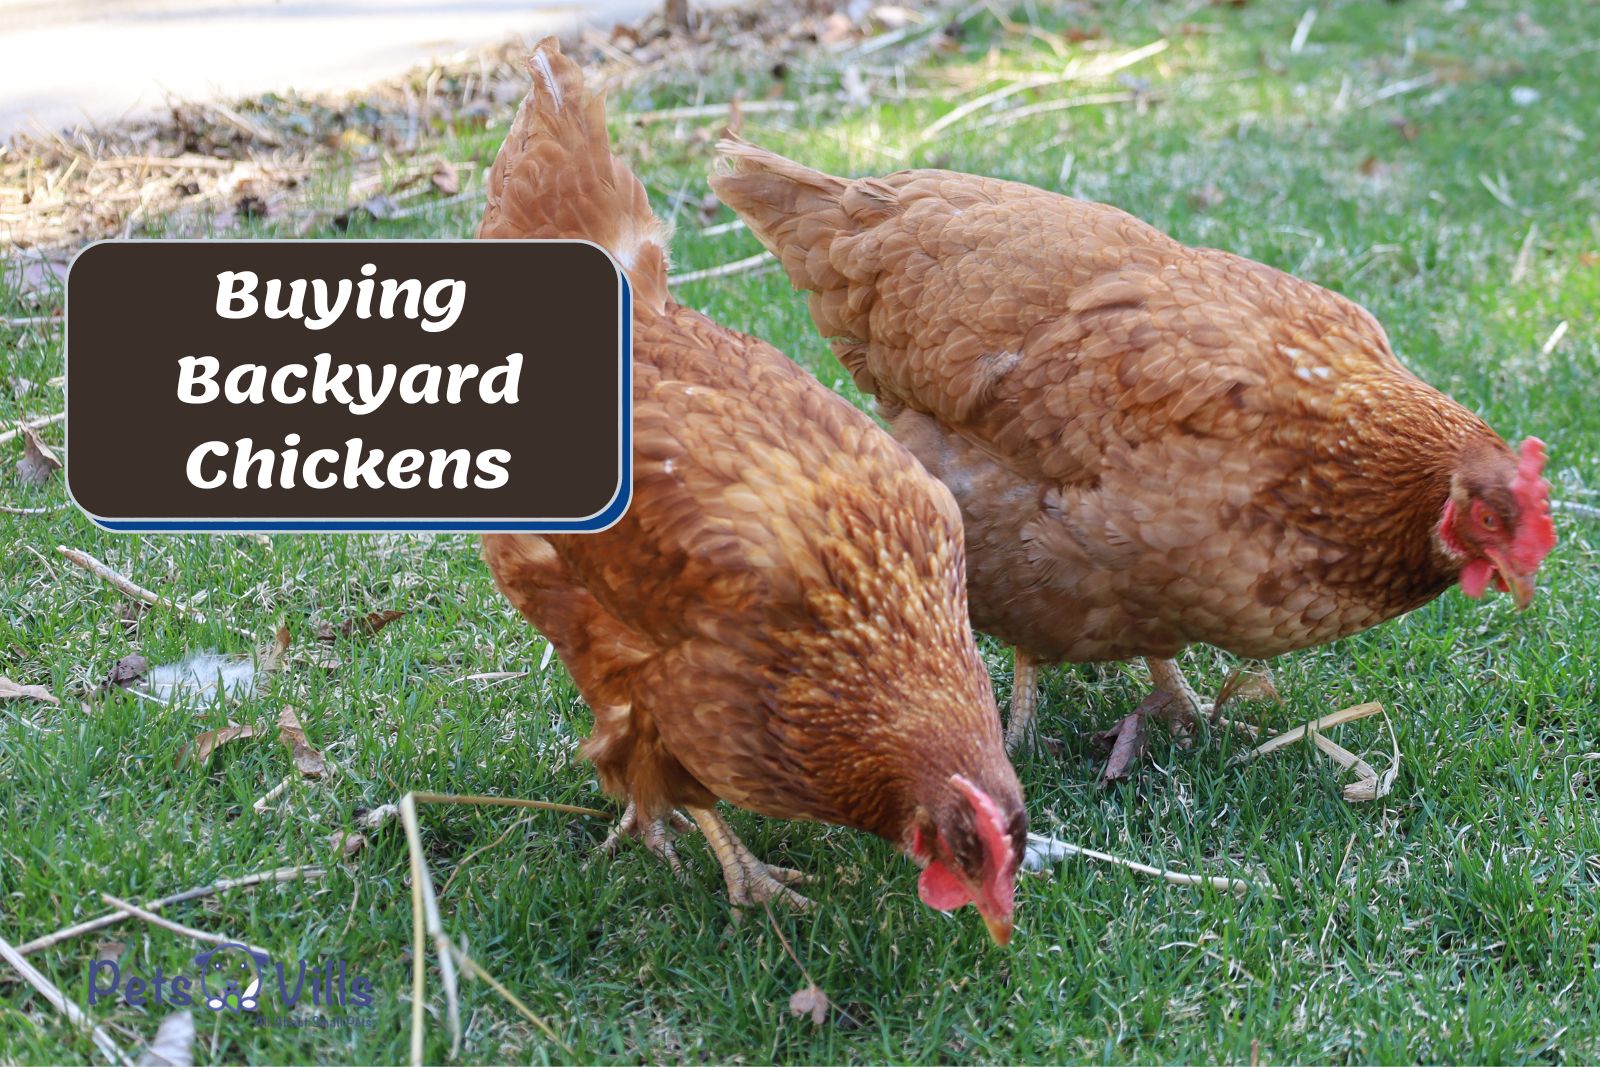 Backyard Chickens pecking on the grass (Guide to Buying Backyard Chickens)